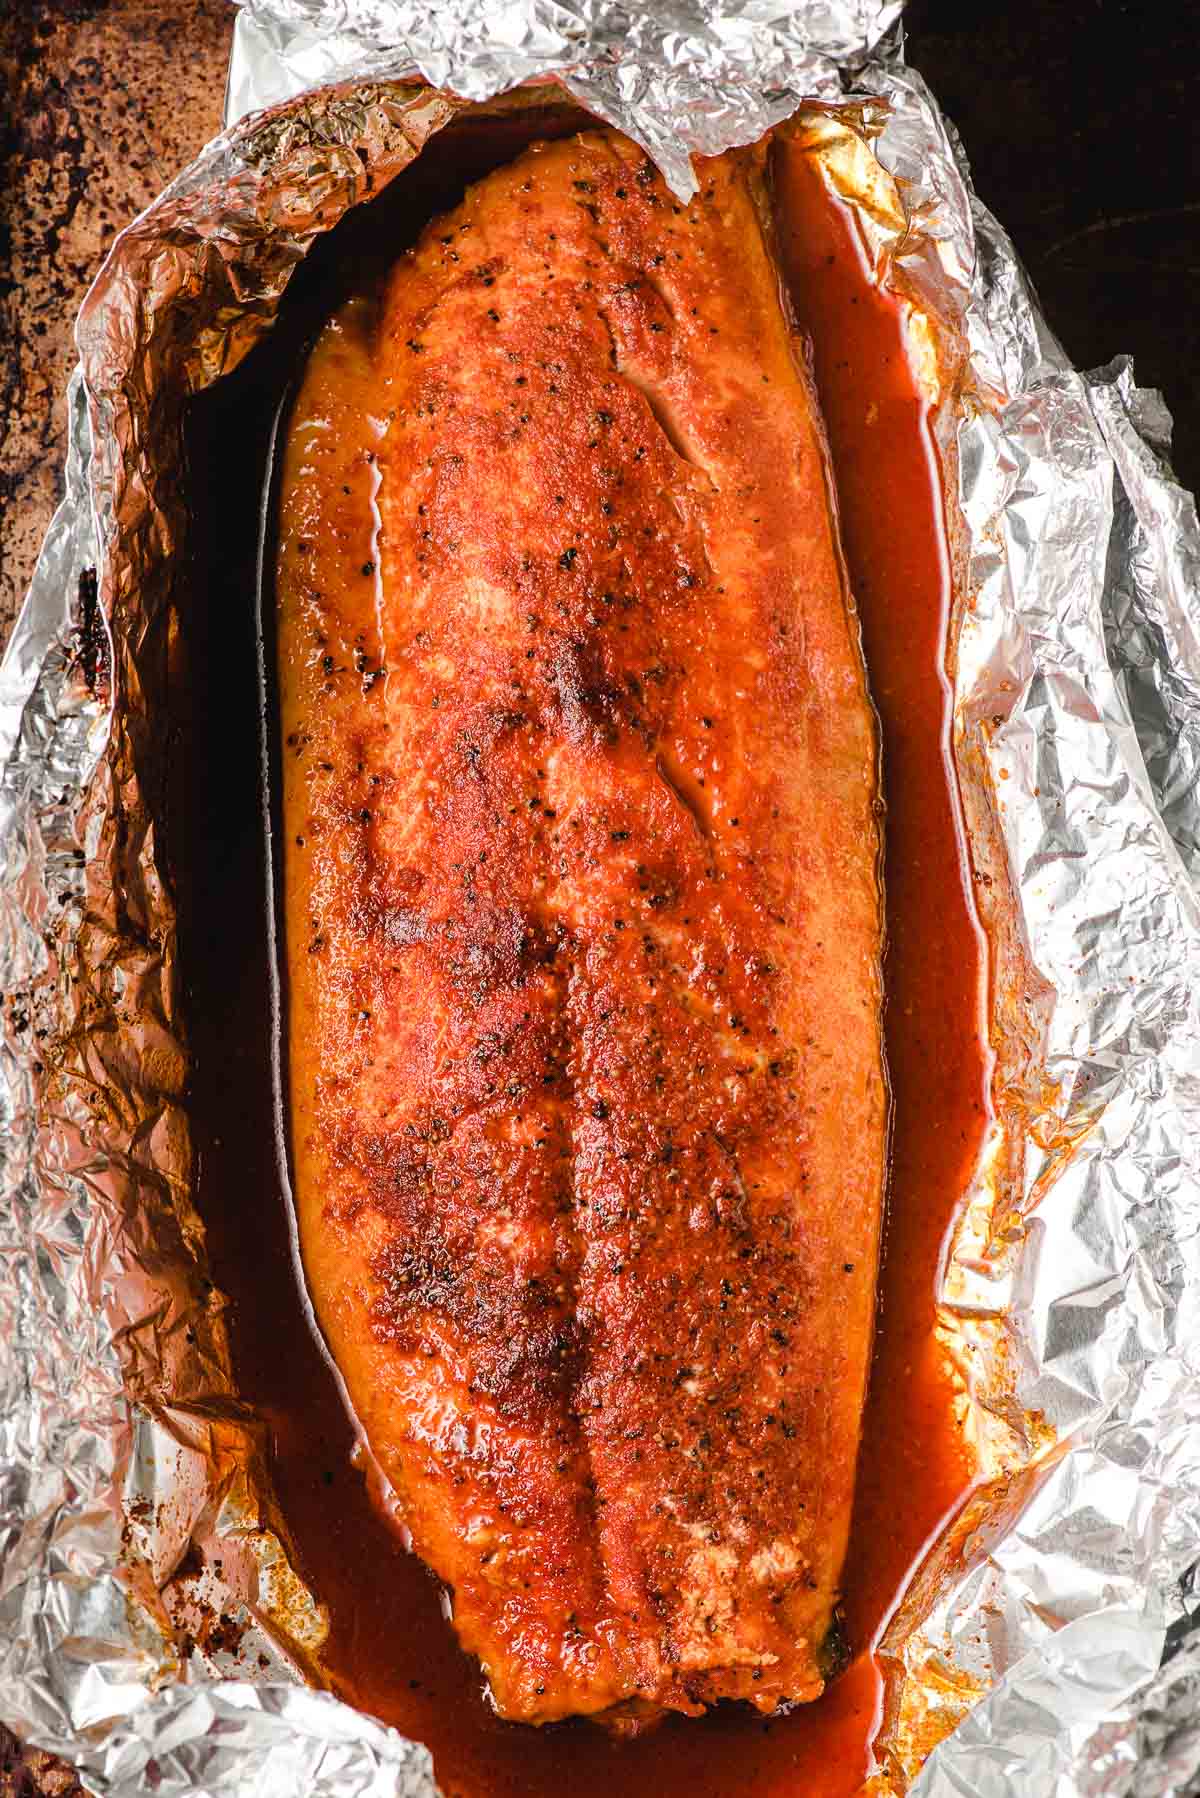 Grilled salmon seasoned with smoked paprika in foil.